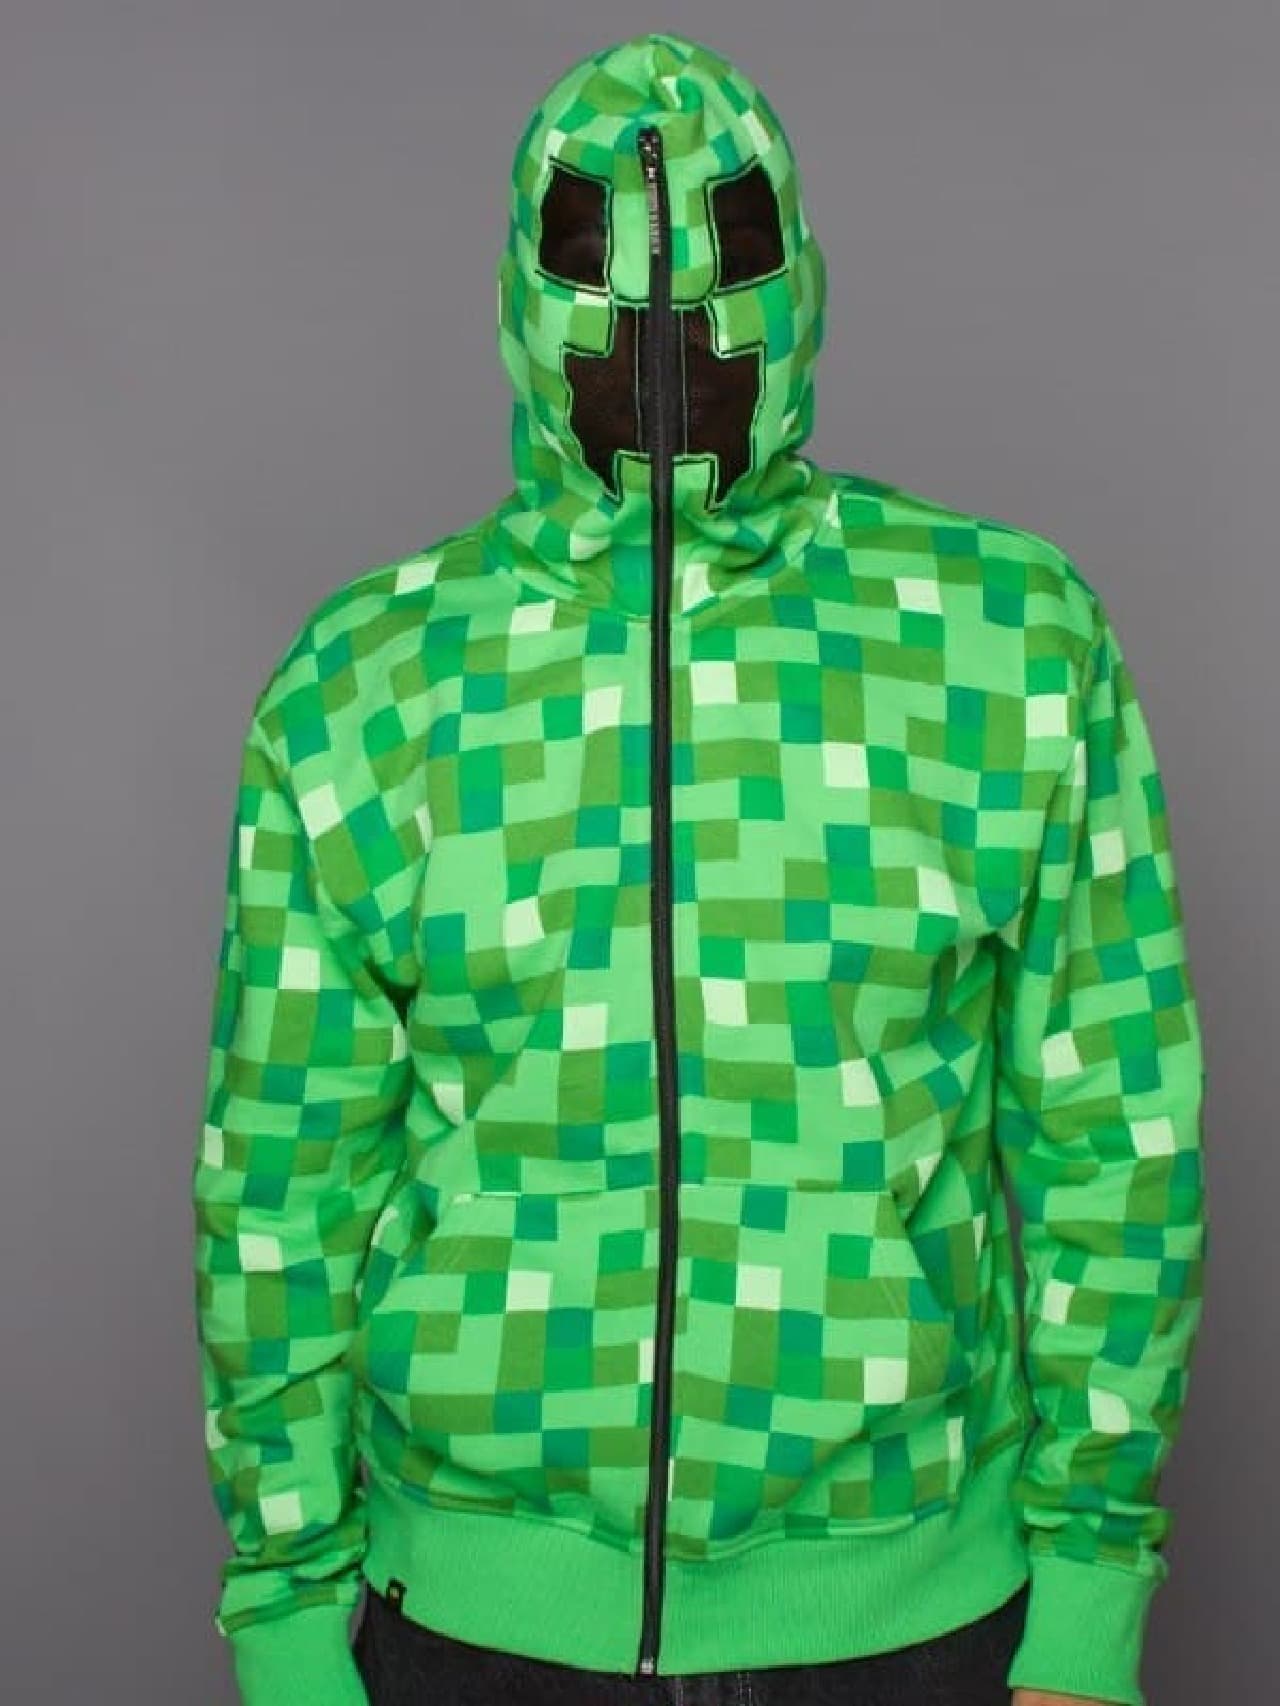 There are also products that can be used for Halloween costumes (the image is a creeper premium hoodie).